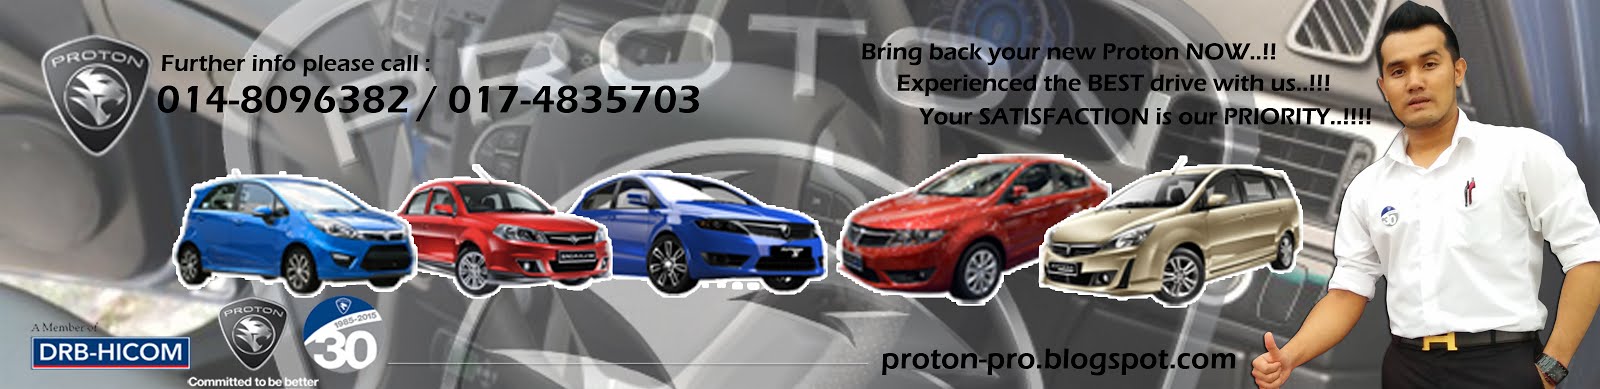 .Welcome to Proton-Pro Blogs Promotion